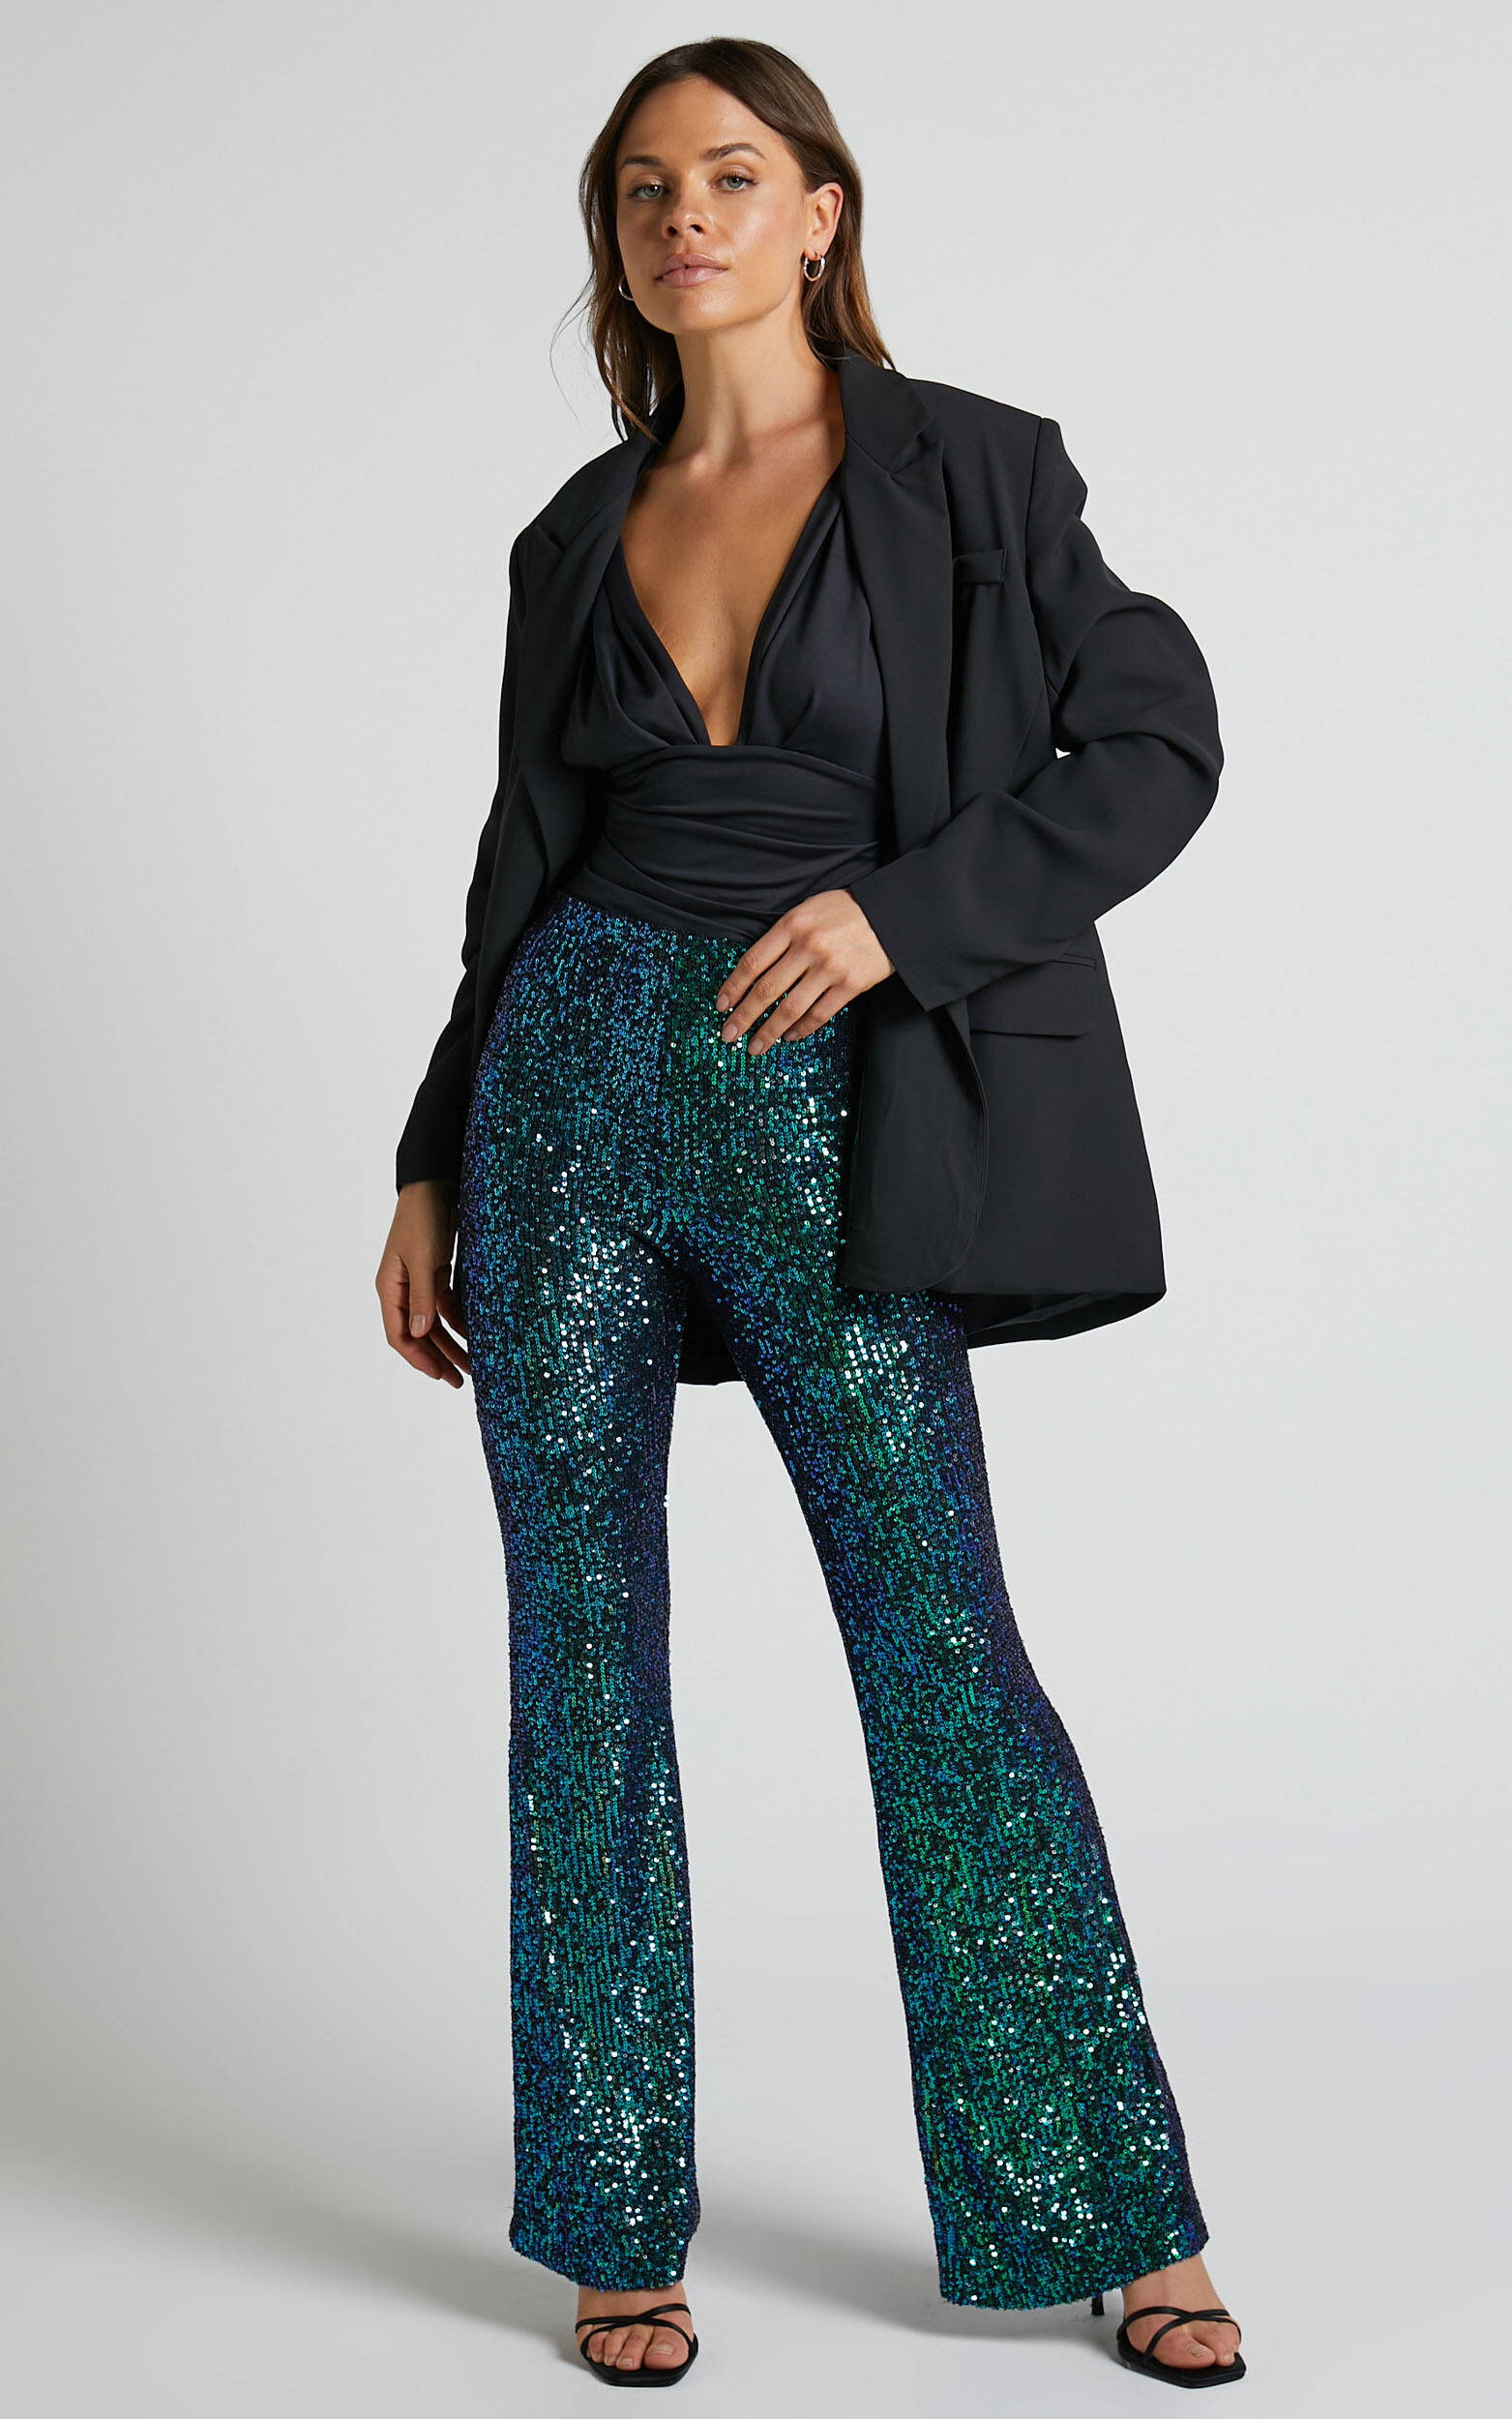 How to Style sequin pants - Side of Sequins